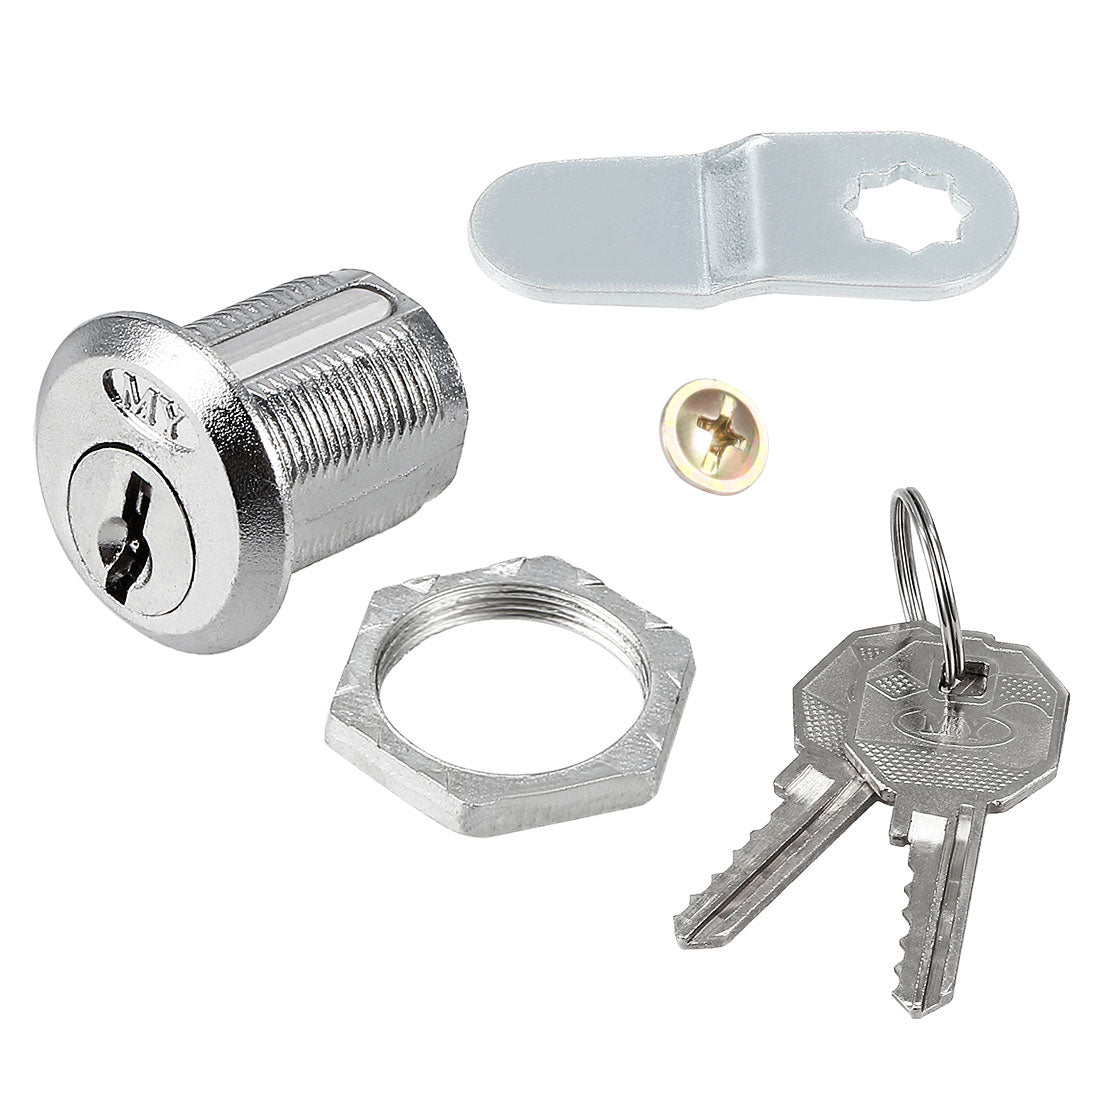 uxcell Uxcell 5pcs 20mm Cylinder 33mm Cam Zinc Alloy Chrome Plated Cam Lock w Key, Keyed Alike